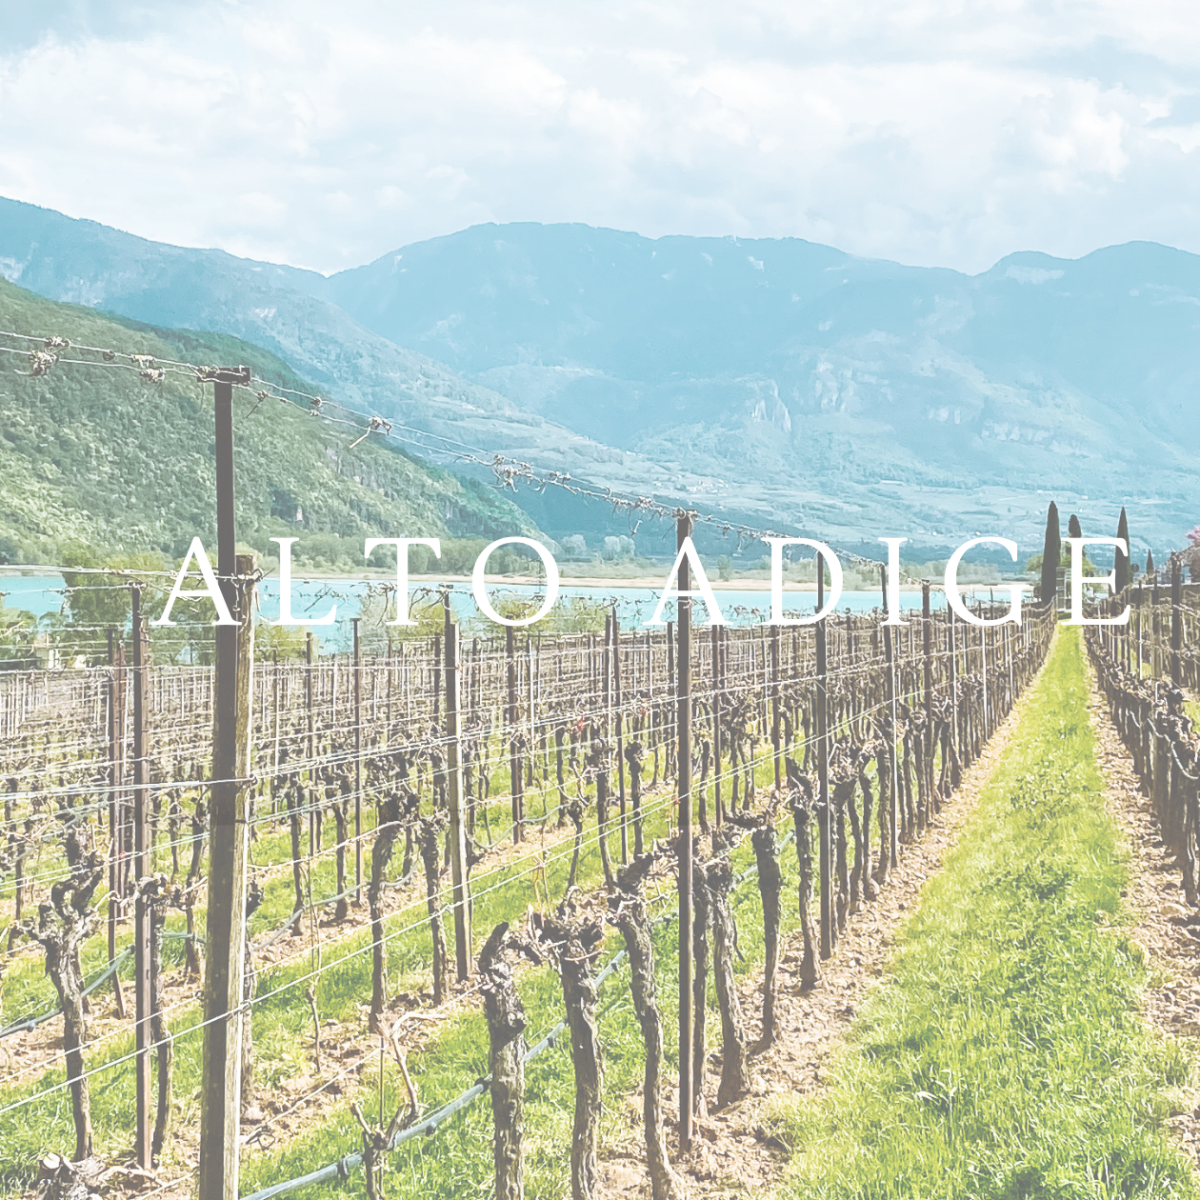 4 Reasons Why Alto Adige Should be Your Next Wine Destination 